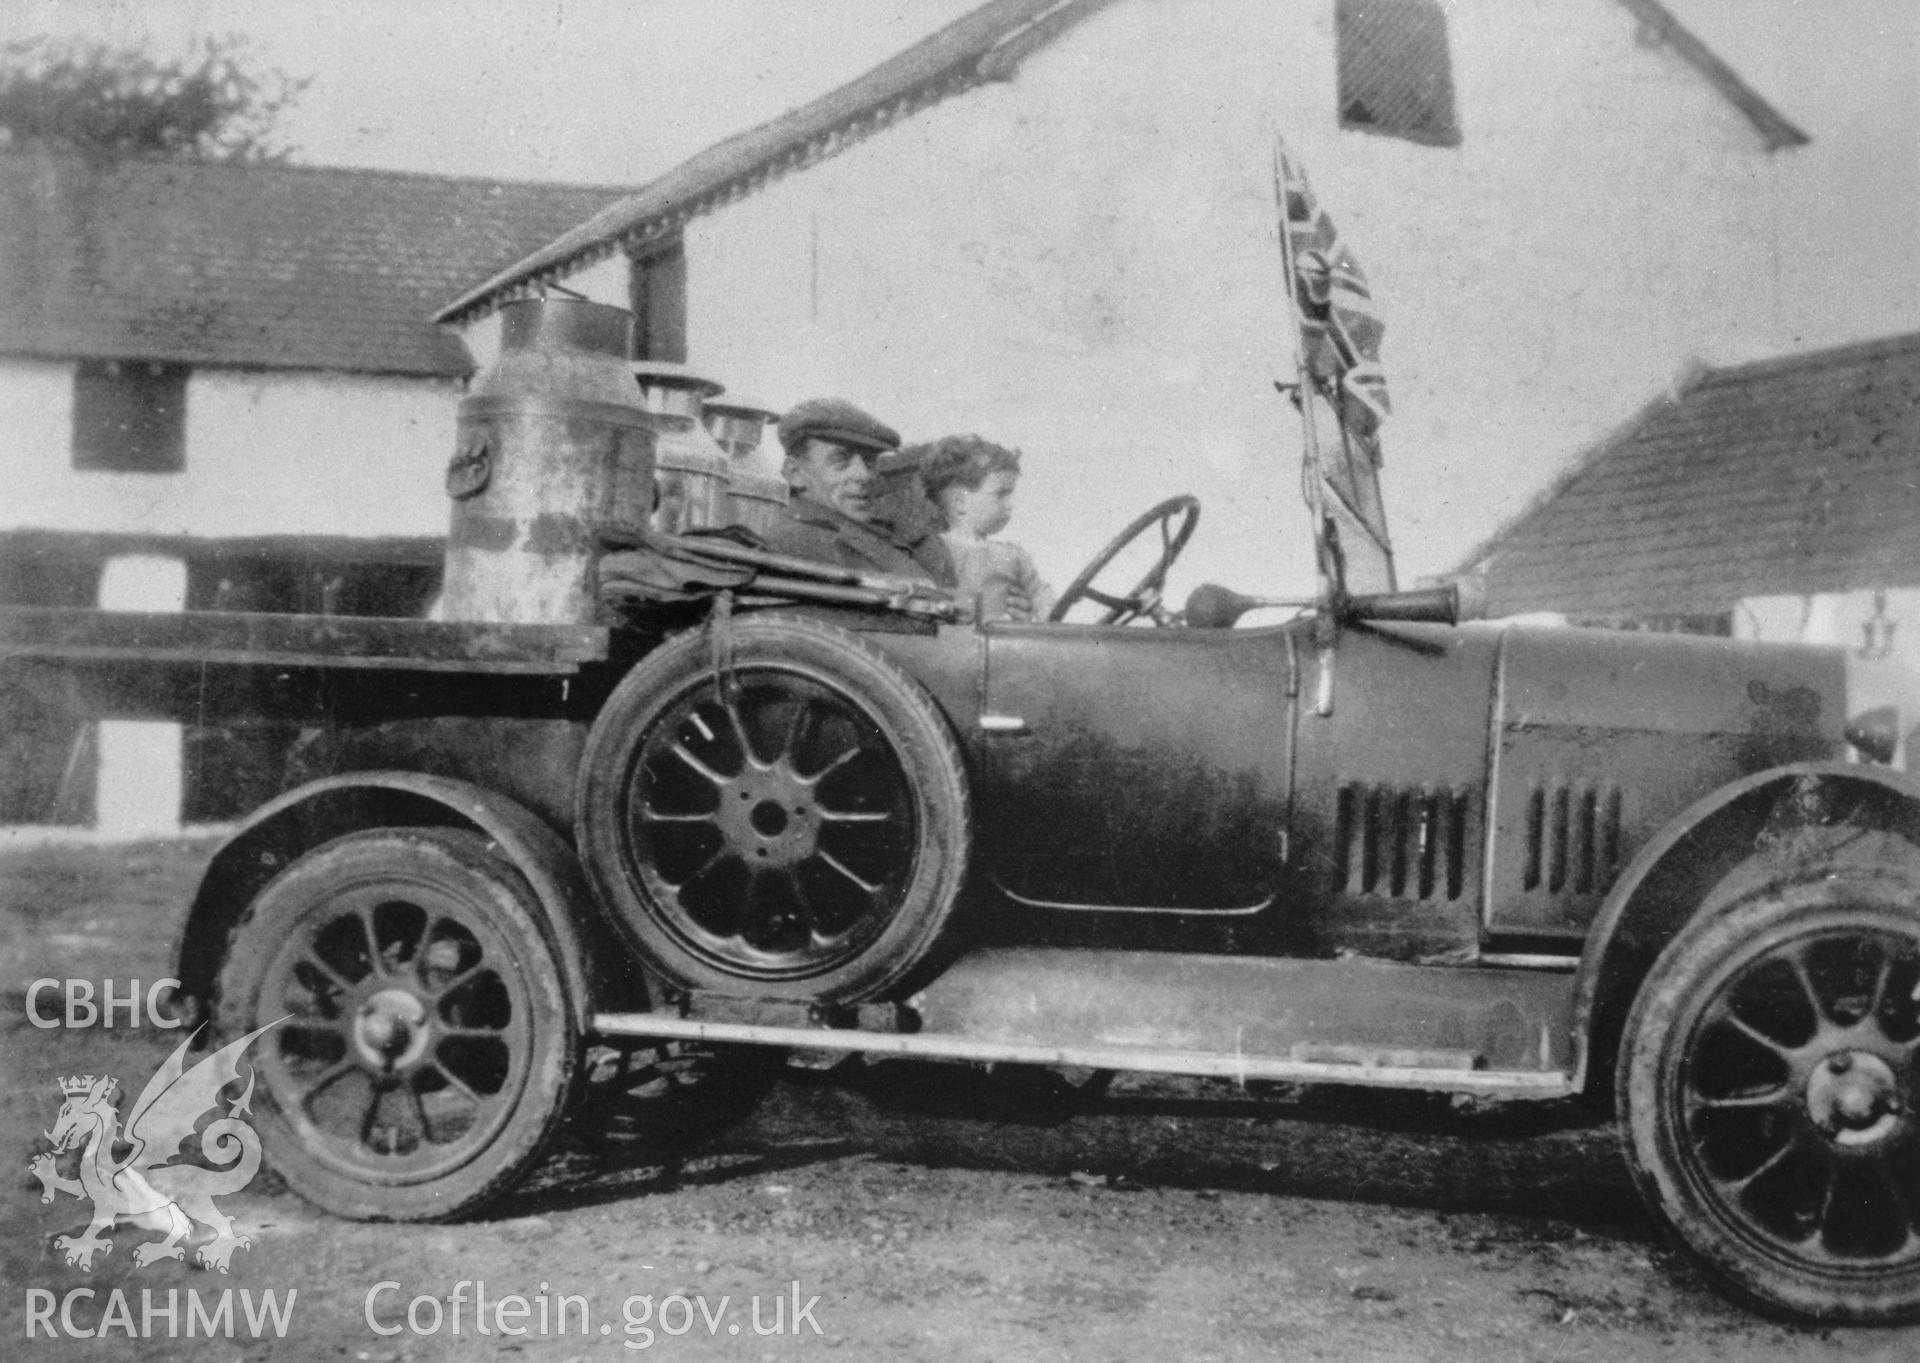 Copy of pre 1950 photo showing vintage car with milk churns on the back